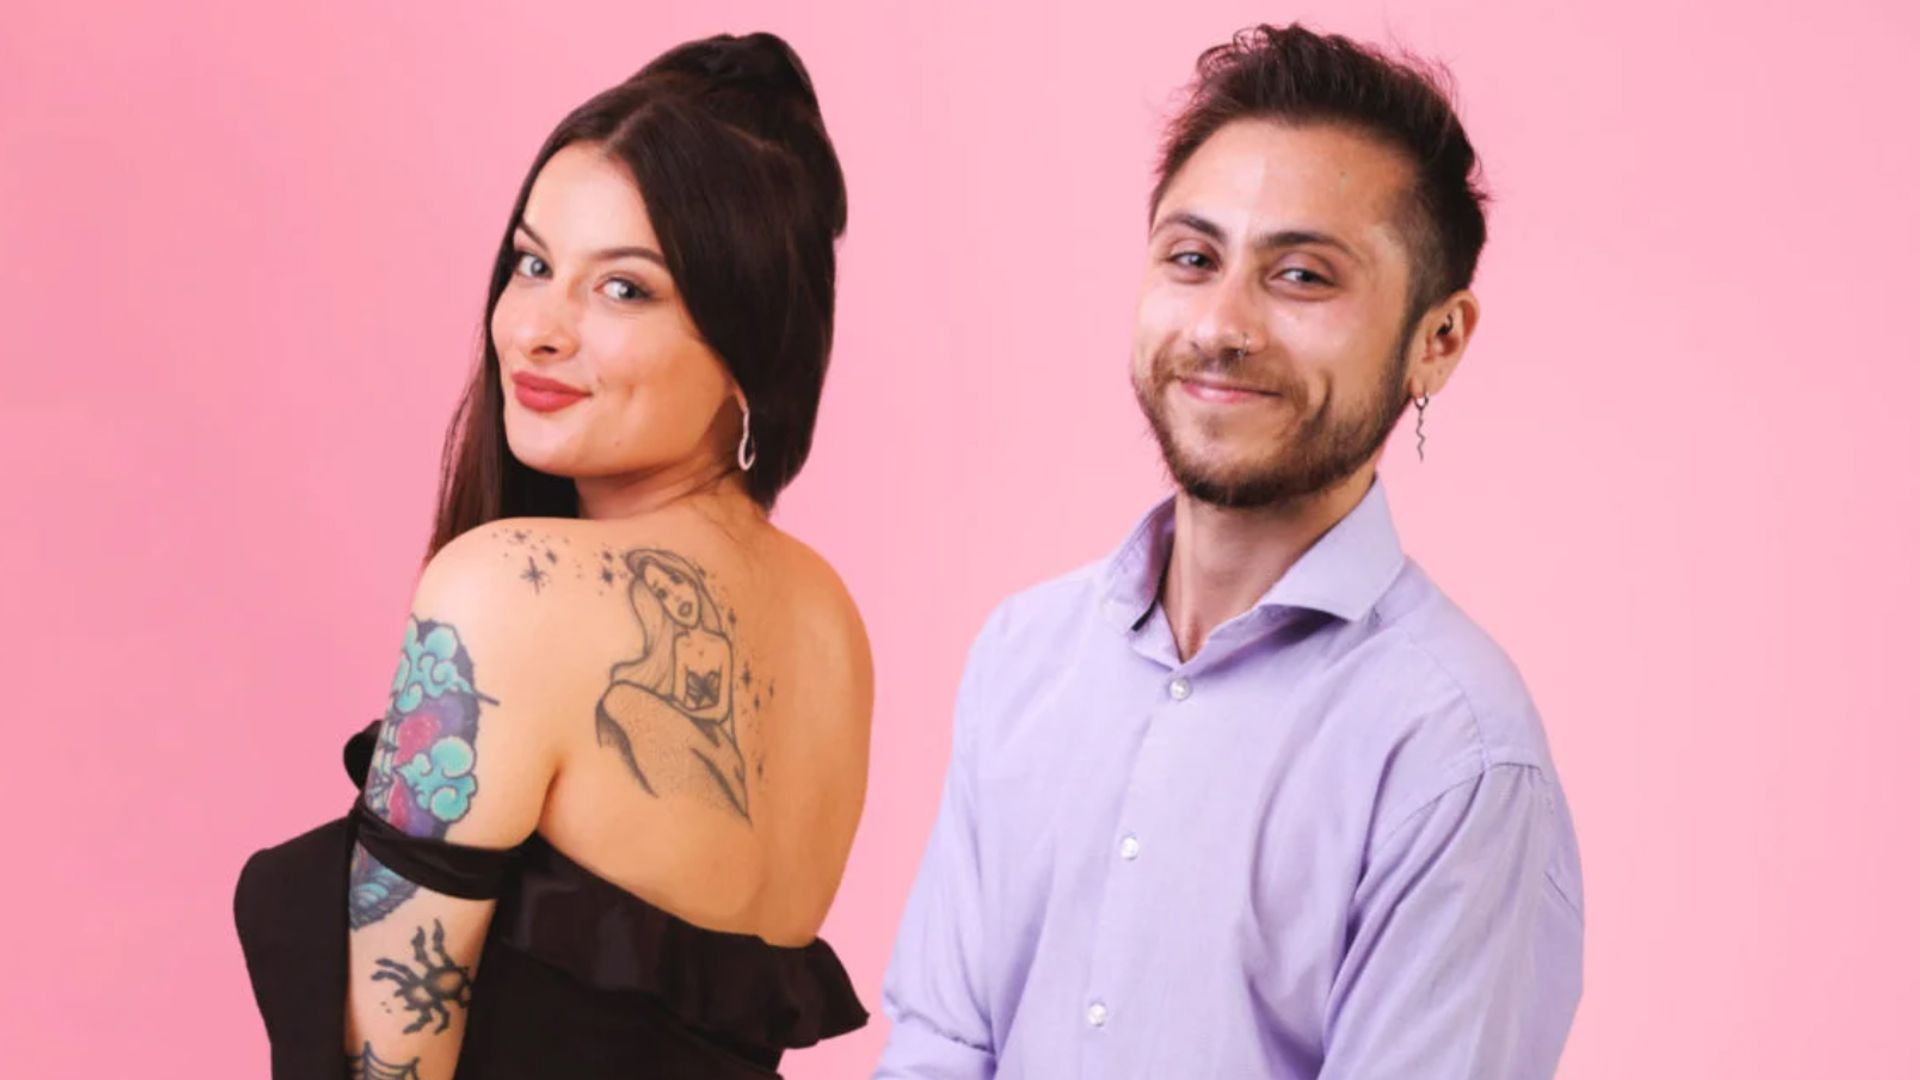 A woman in a black dress and tattoos and a man in a lavendar shirt in front of a pink background